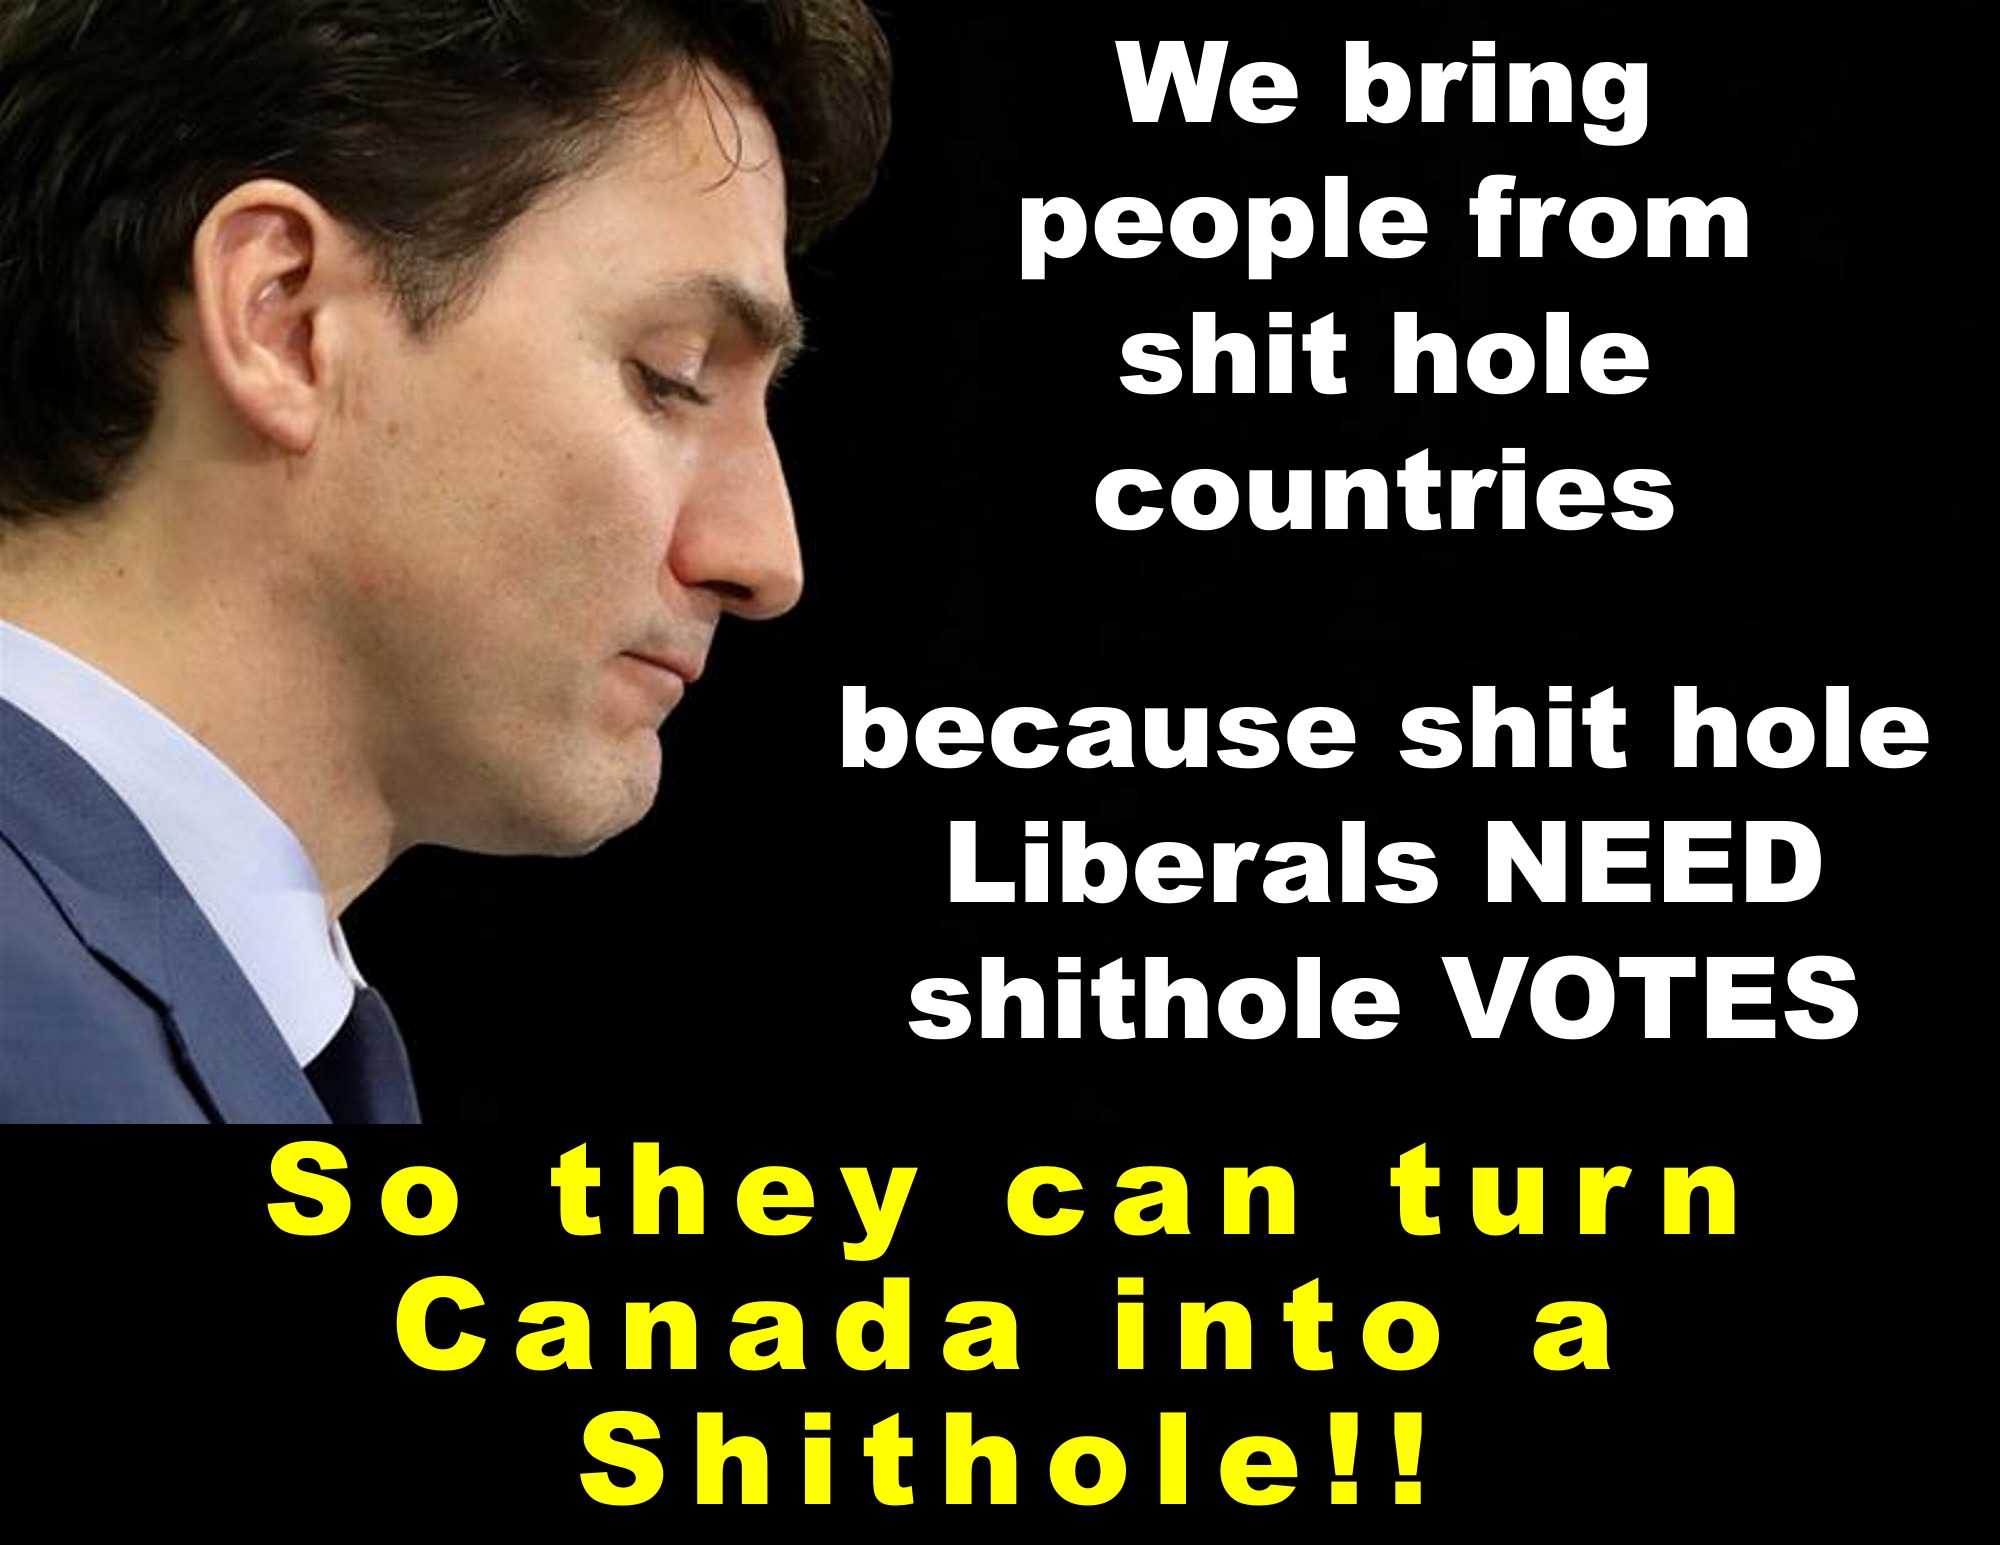 We bring people from s-hole countries so they can turn Canada into a s-hole